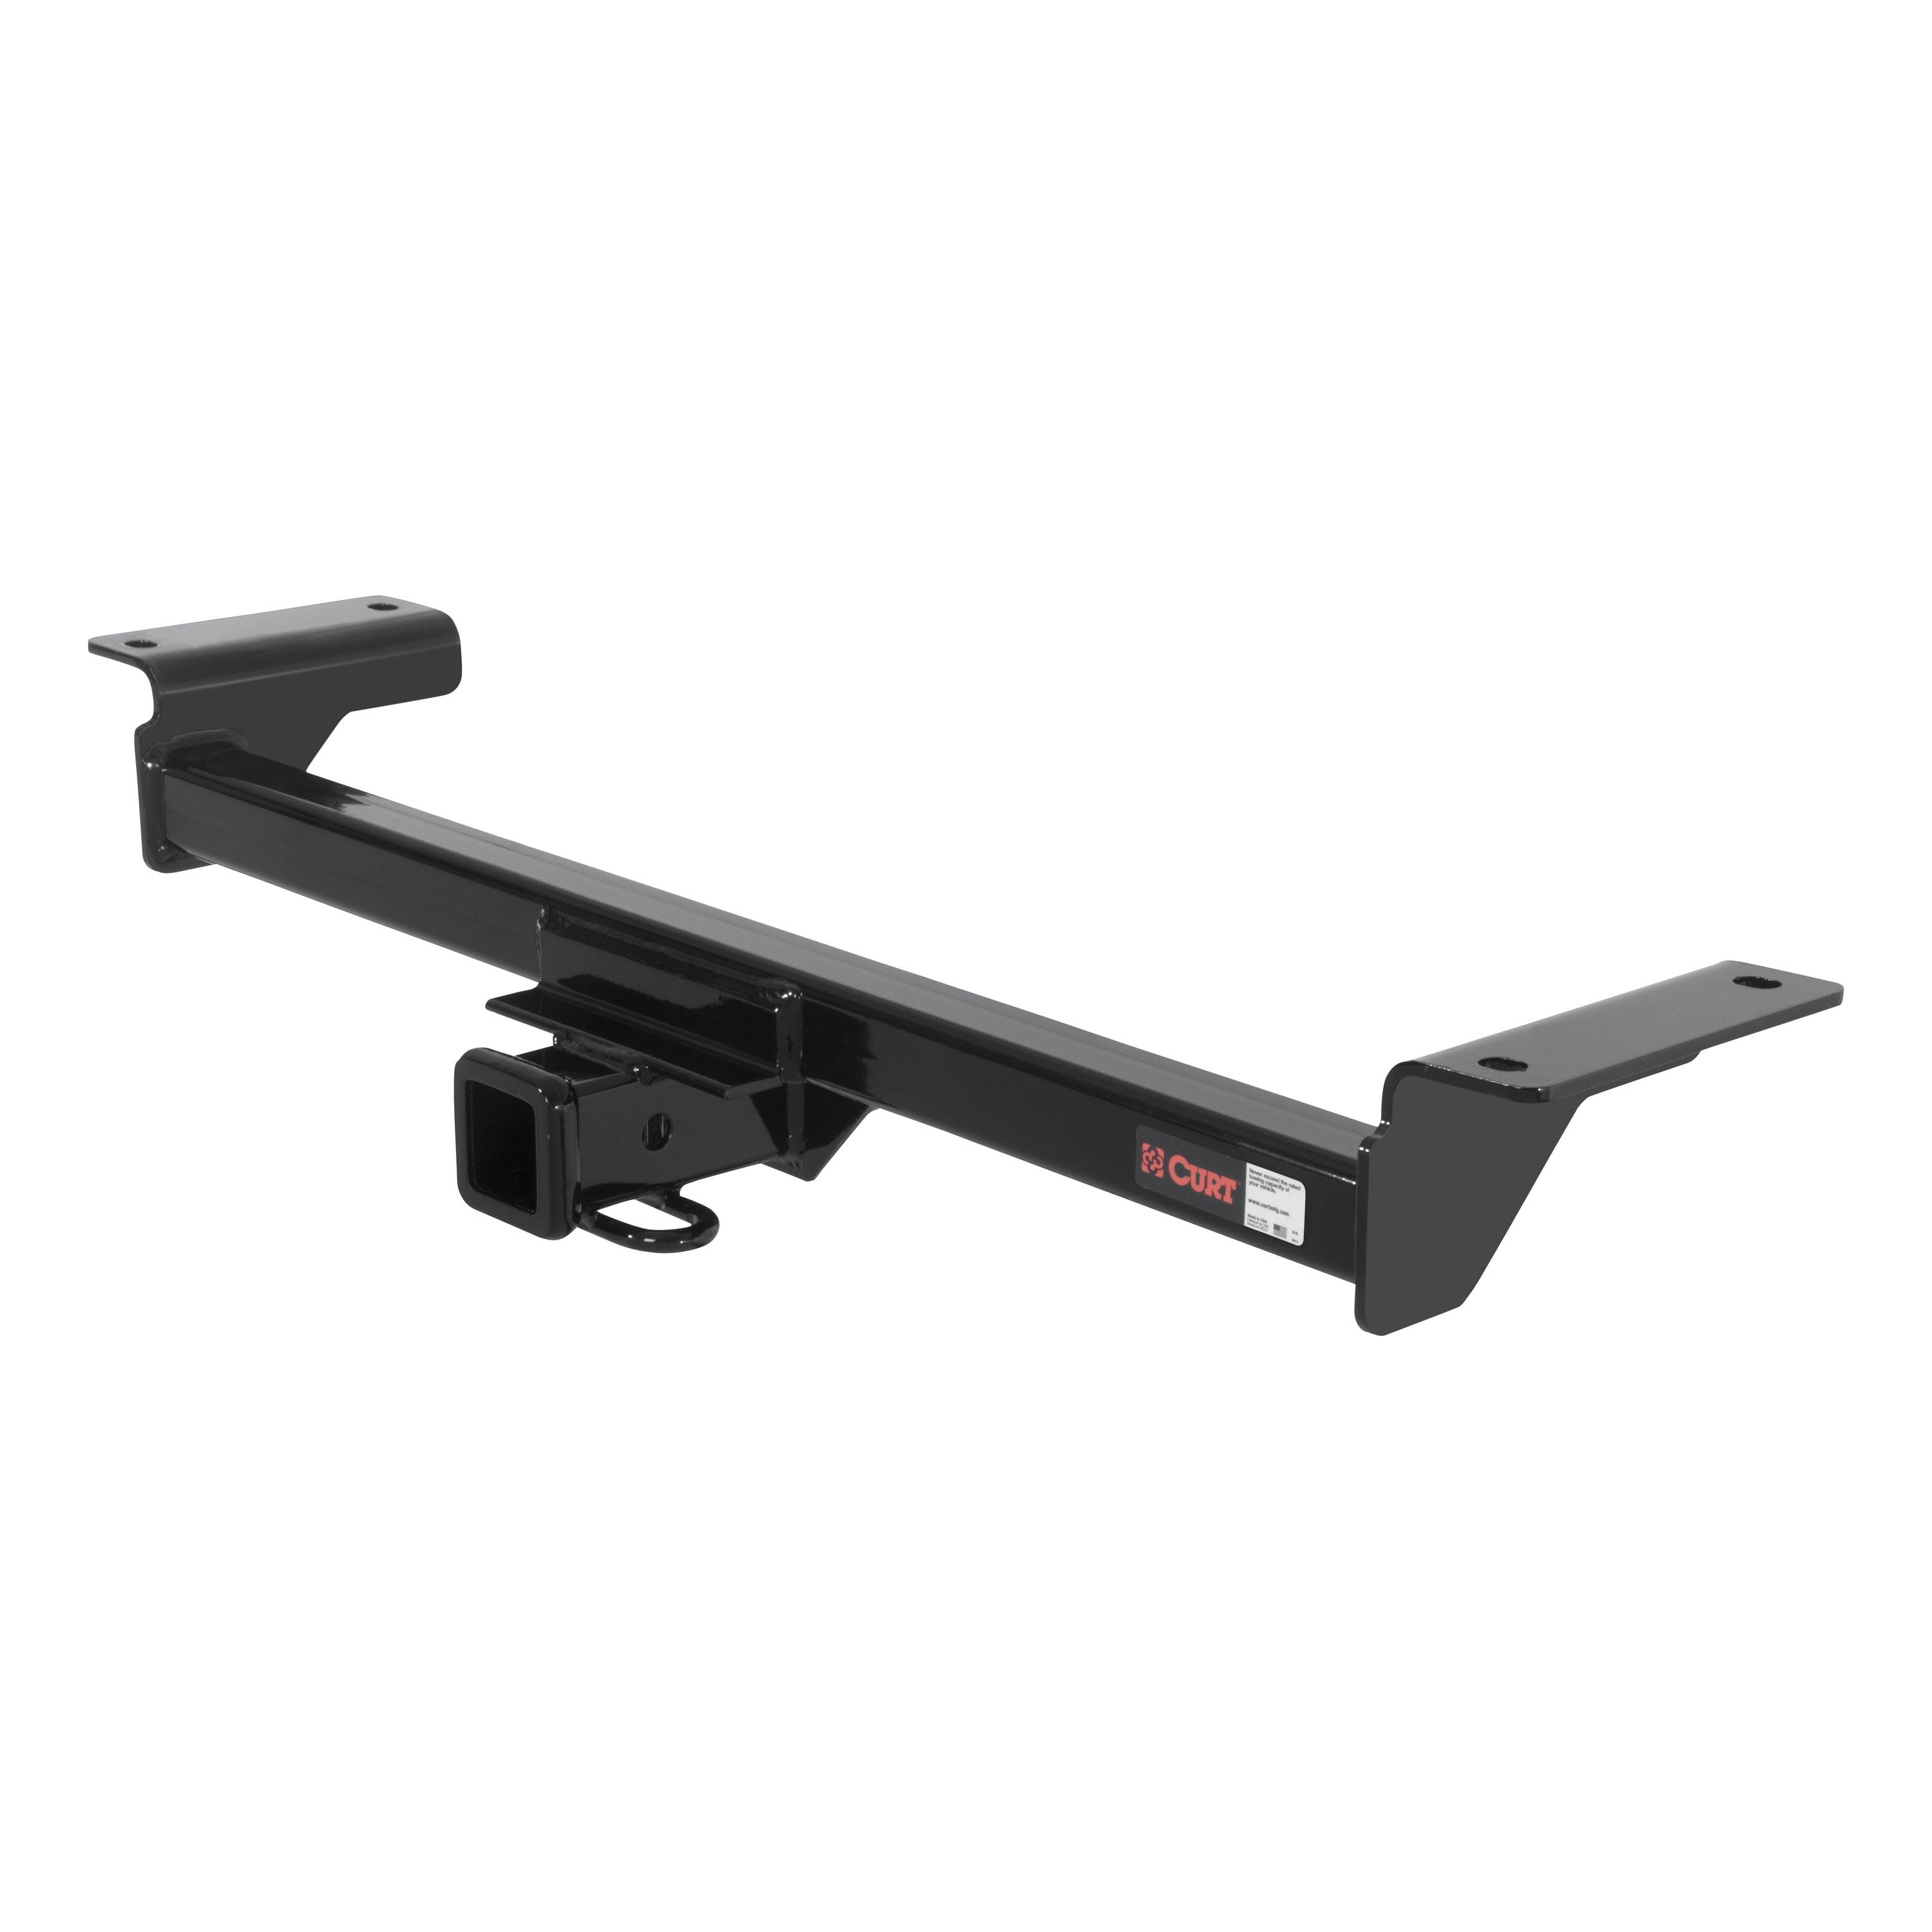 CURT 13536 Class 3 Trailer Hitch, 2 Receiver, Select Acura RDX